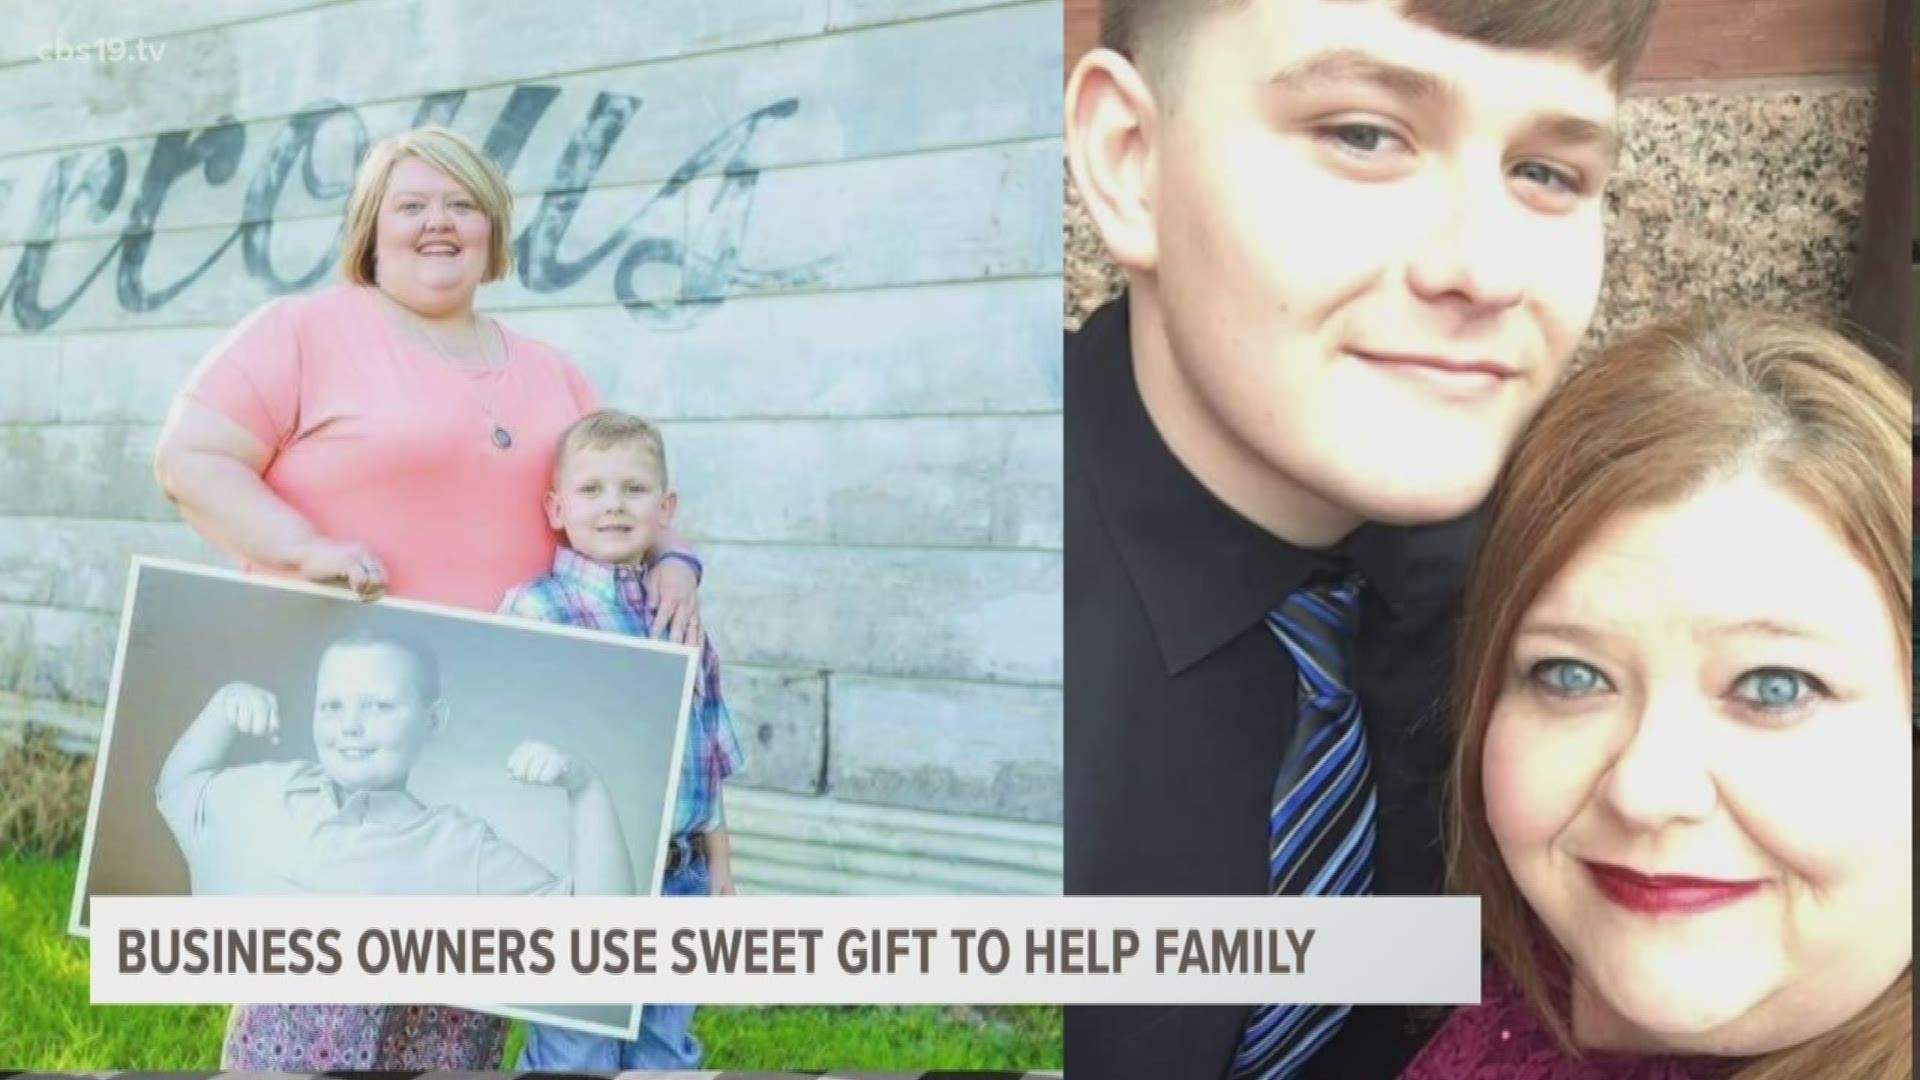 Sandy and Keesha were killed in a tragic crash Friday night. Now their Sulphur Springs community is working to help their family when they need it most.